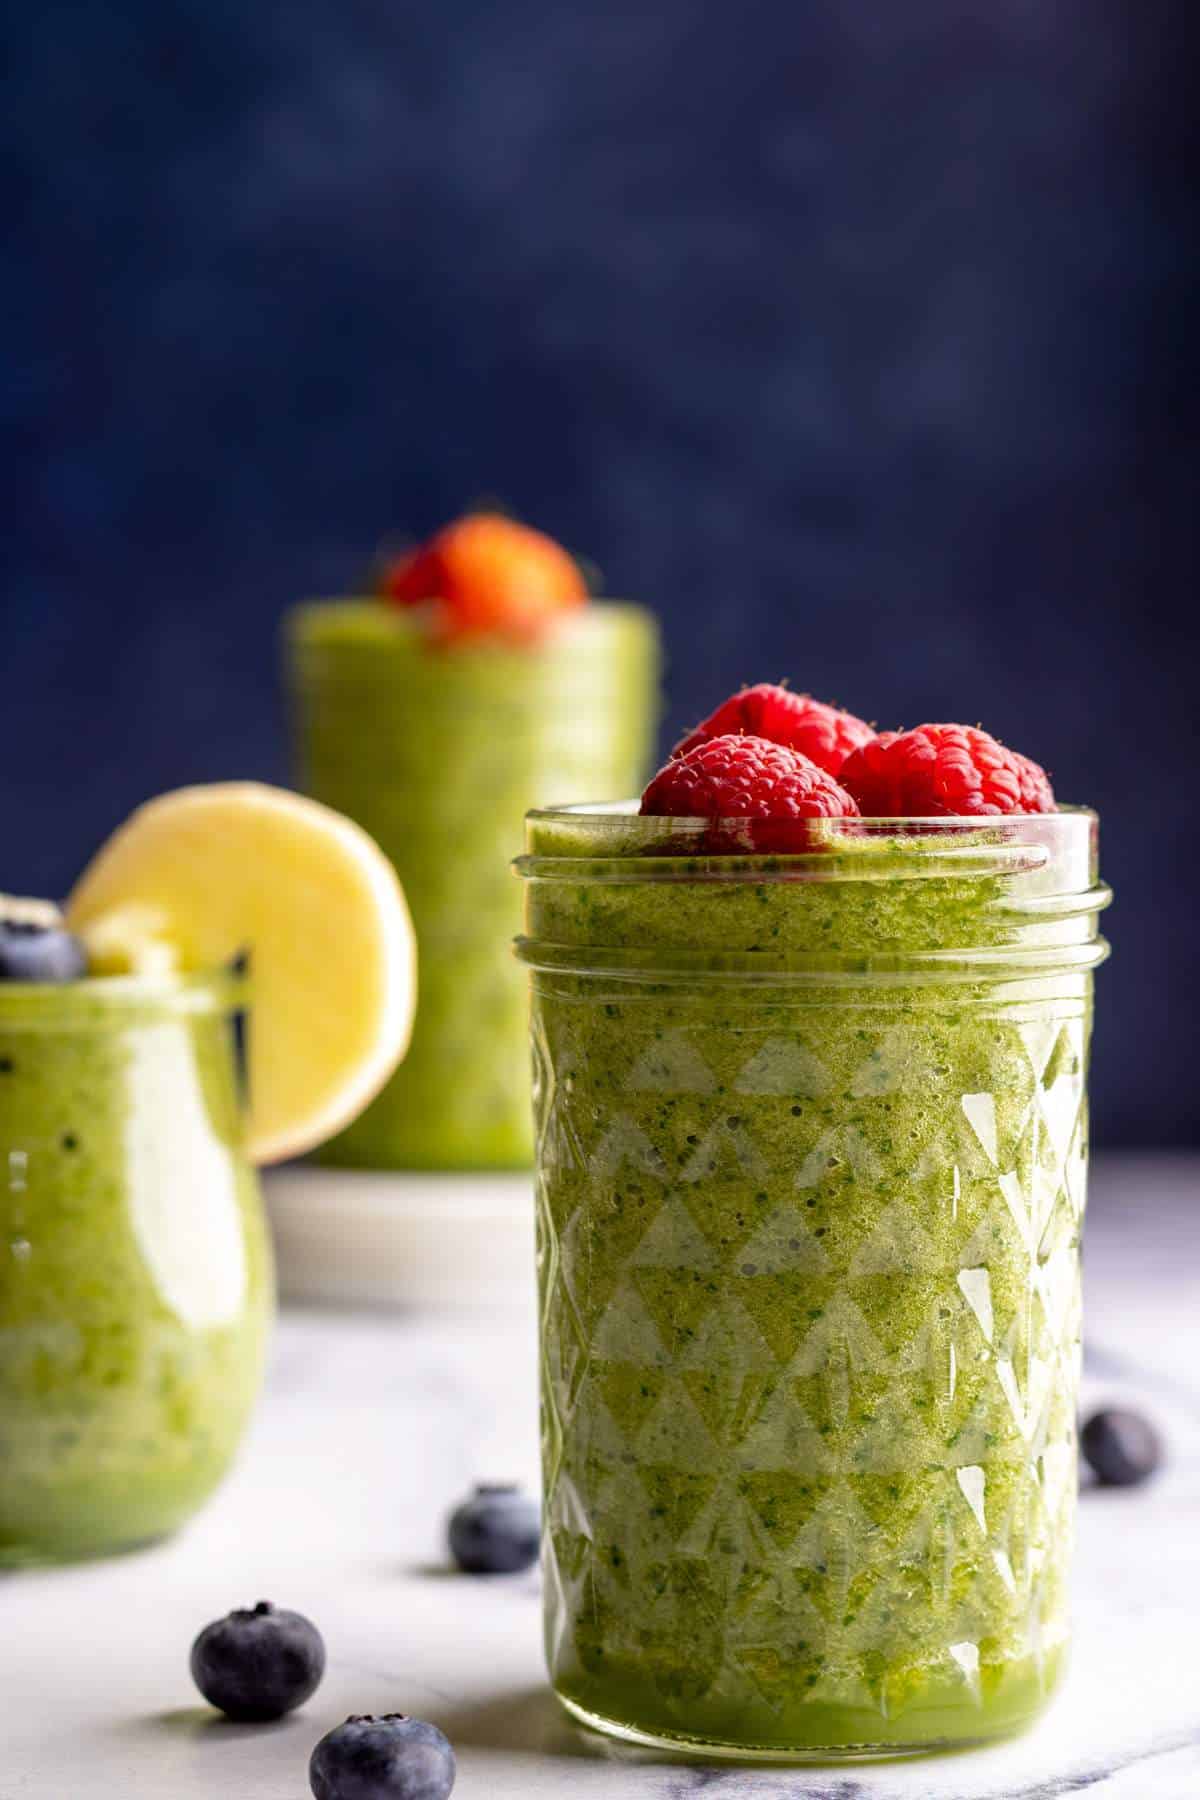 Green smoothie in a jar with raspberries on top closeup shot.